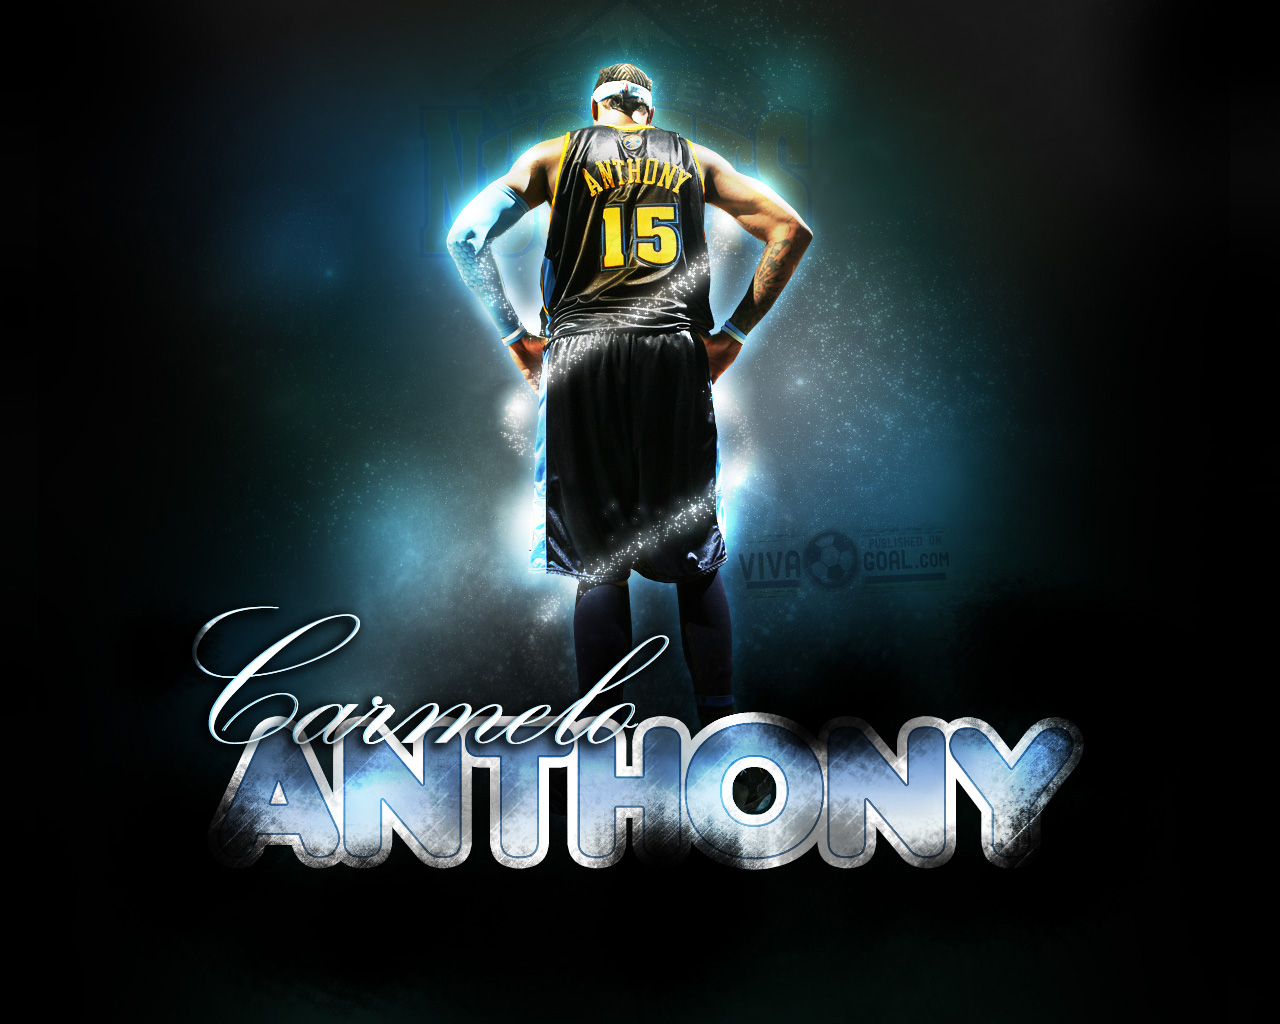 Carmelo Anthony Basketball Wallpapers